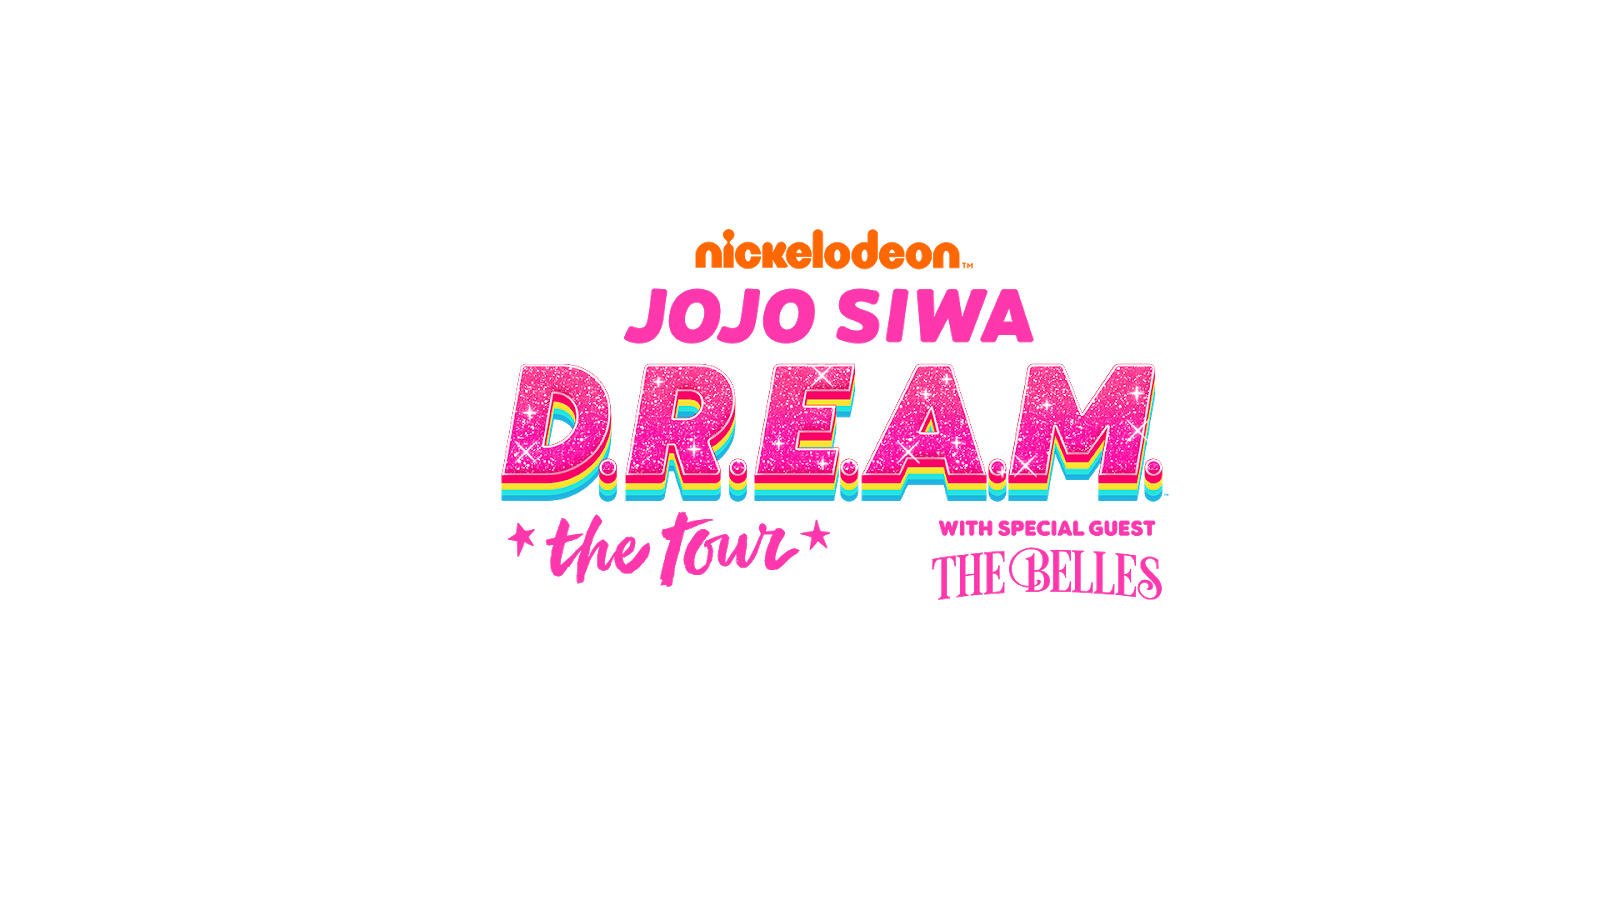 Nickelodeon’s JoJo Siwa D.R.E.A.M. The Tour Adds 50 New Dates in 2020 Updat...